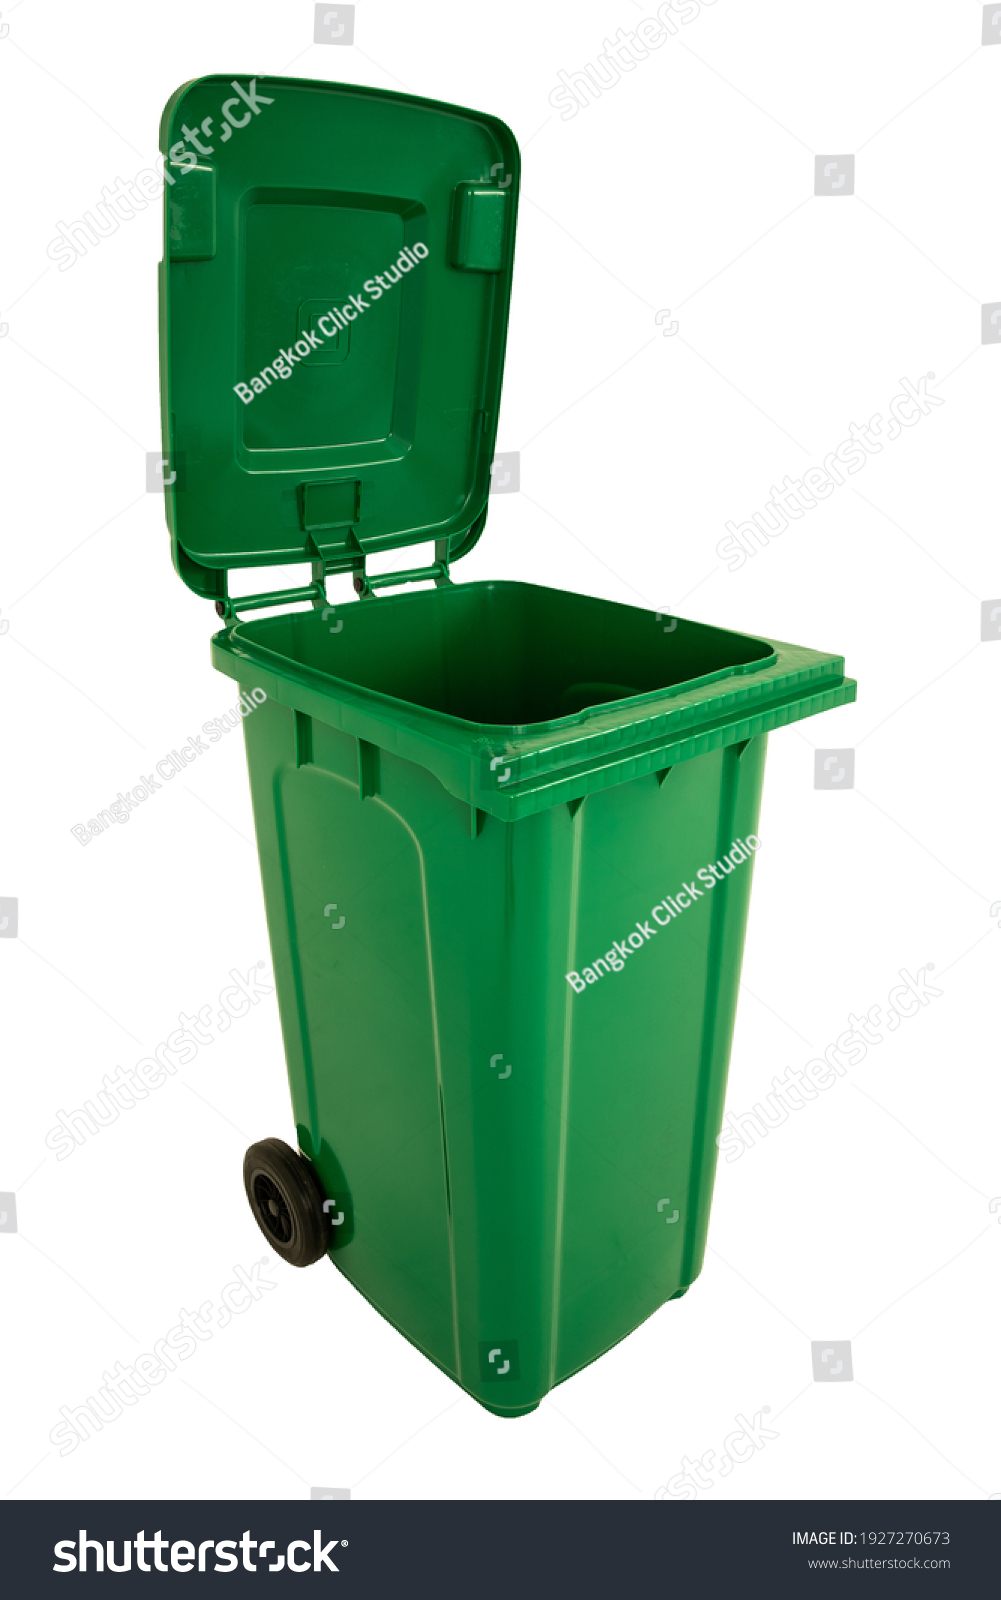 A new unbox green large bin isolated on white background. #1927270673